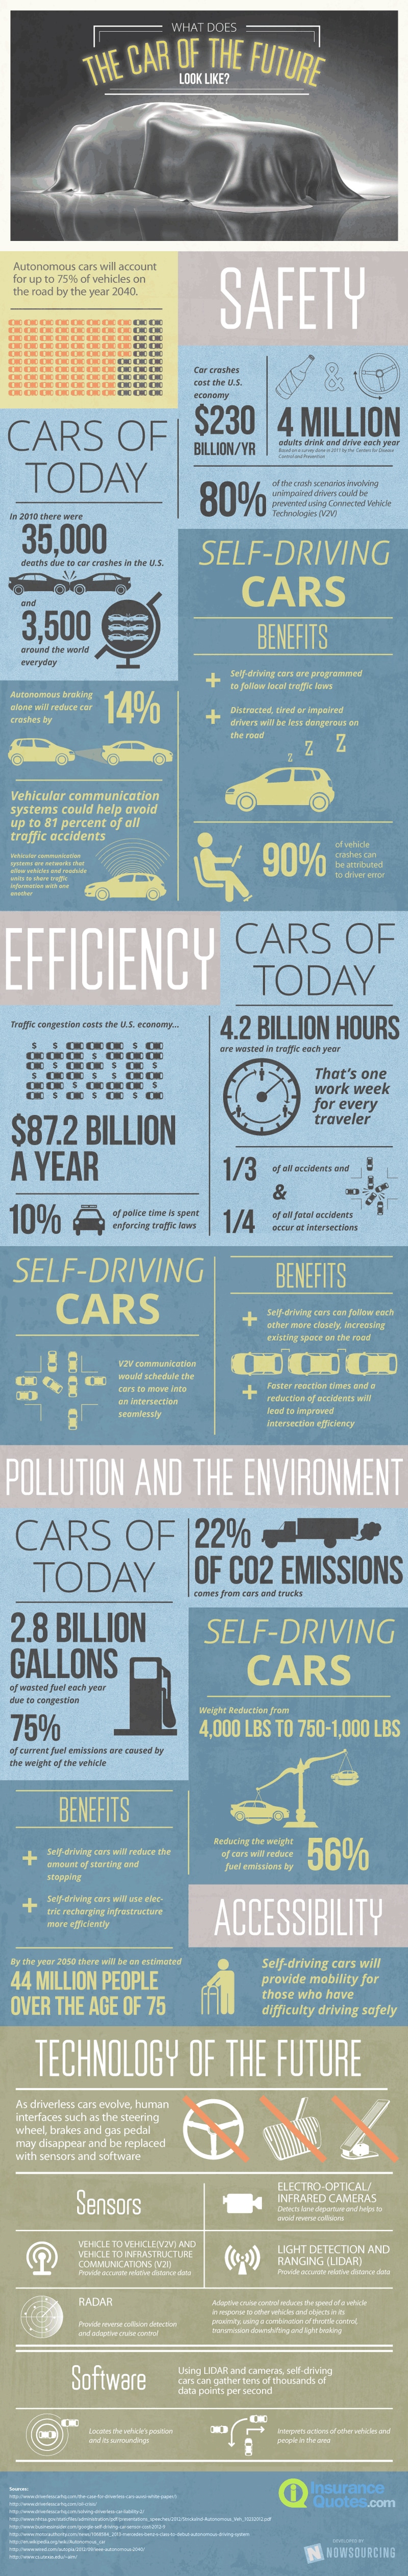 Driverless Cars Are Coming Sooner Than You May Think [Infographic]